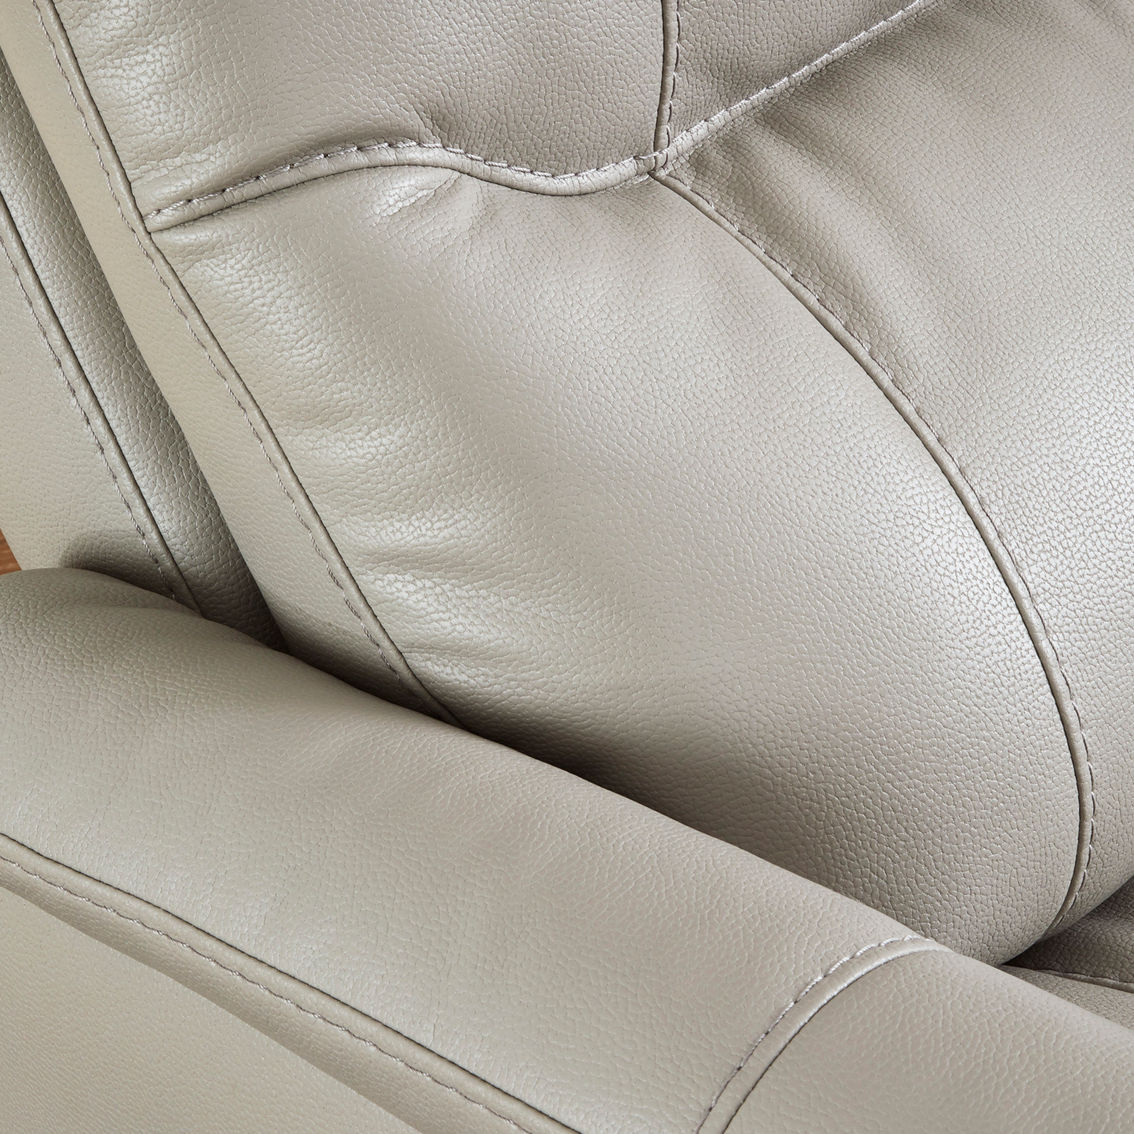 Signature Design by Ashley Riptyme Swivel Glider Recliner - Image 7 of 7